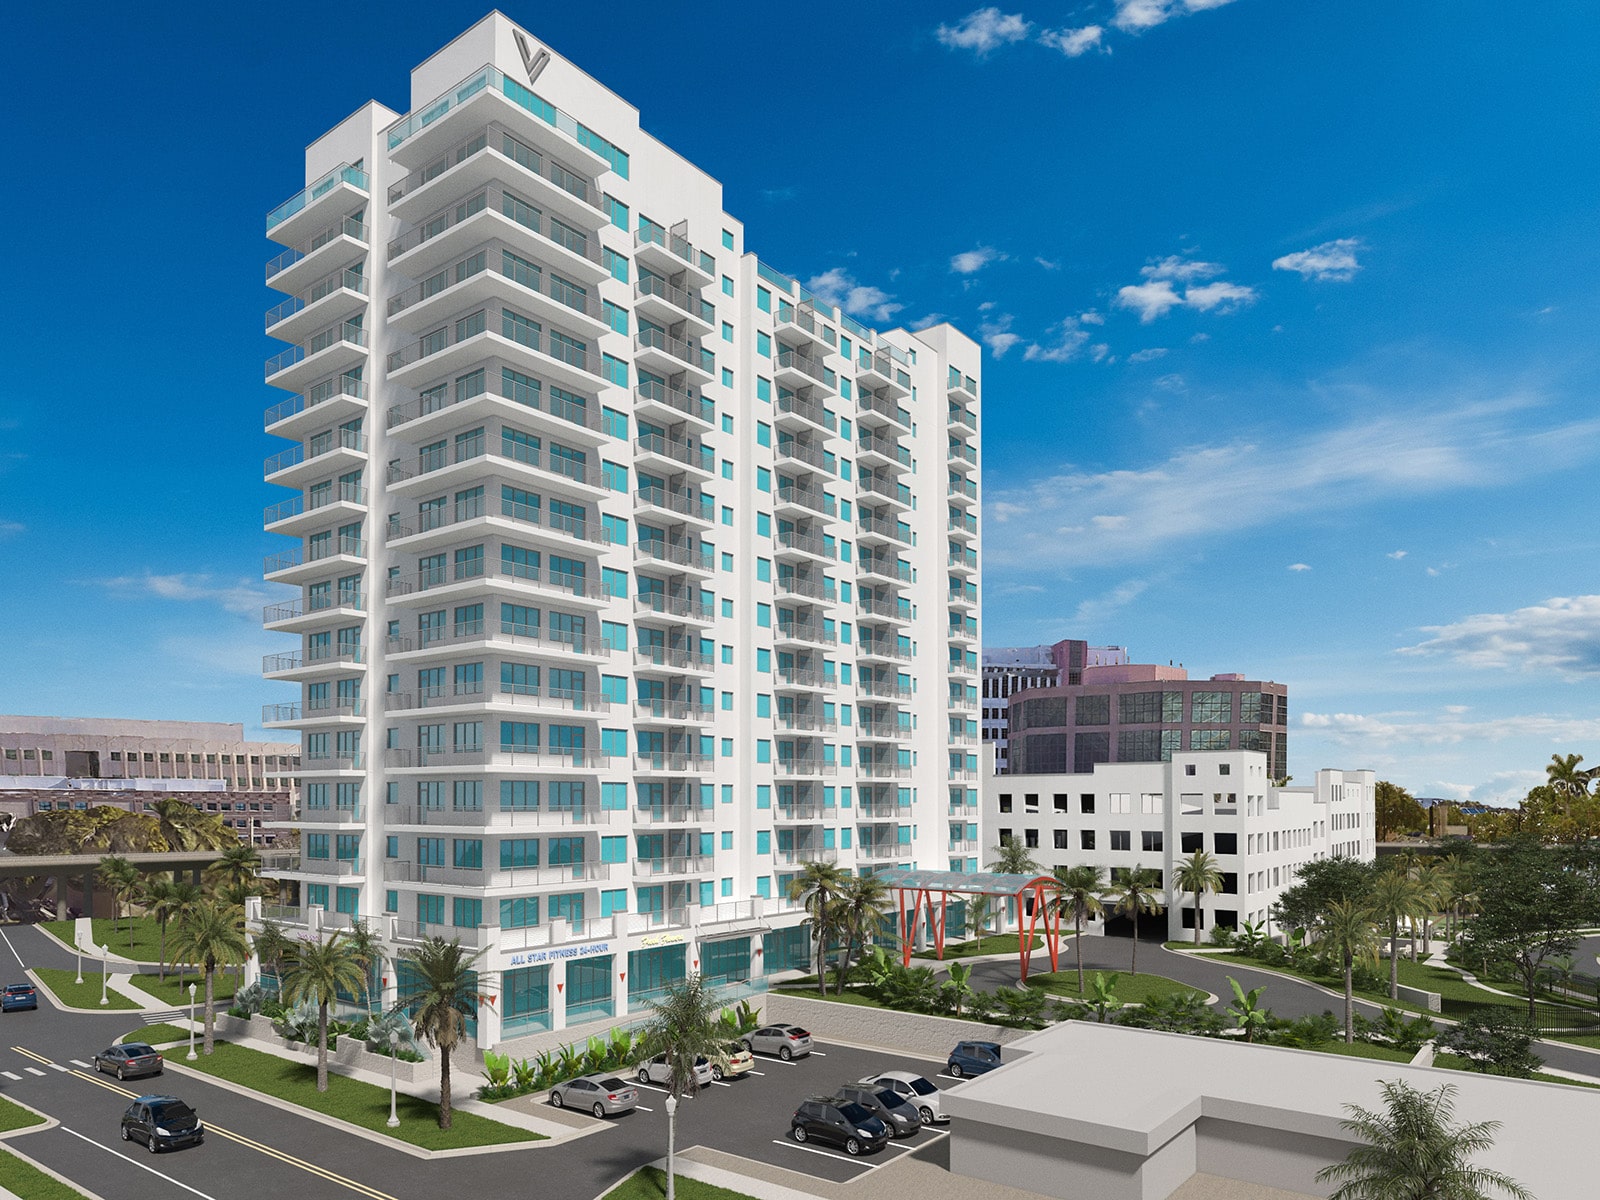 Rendering of the Ft. Myers Vantage property